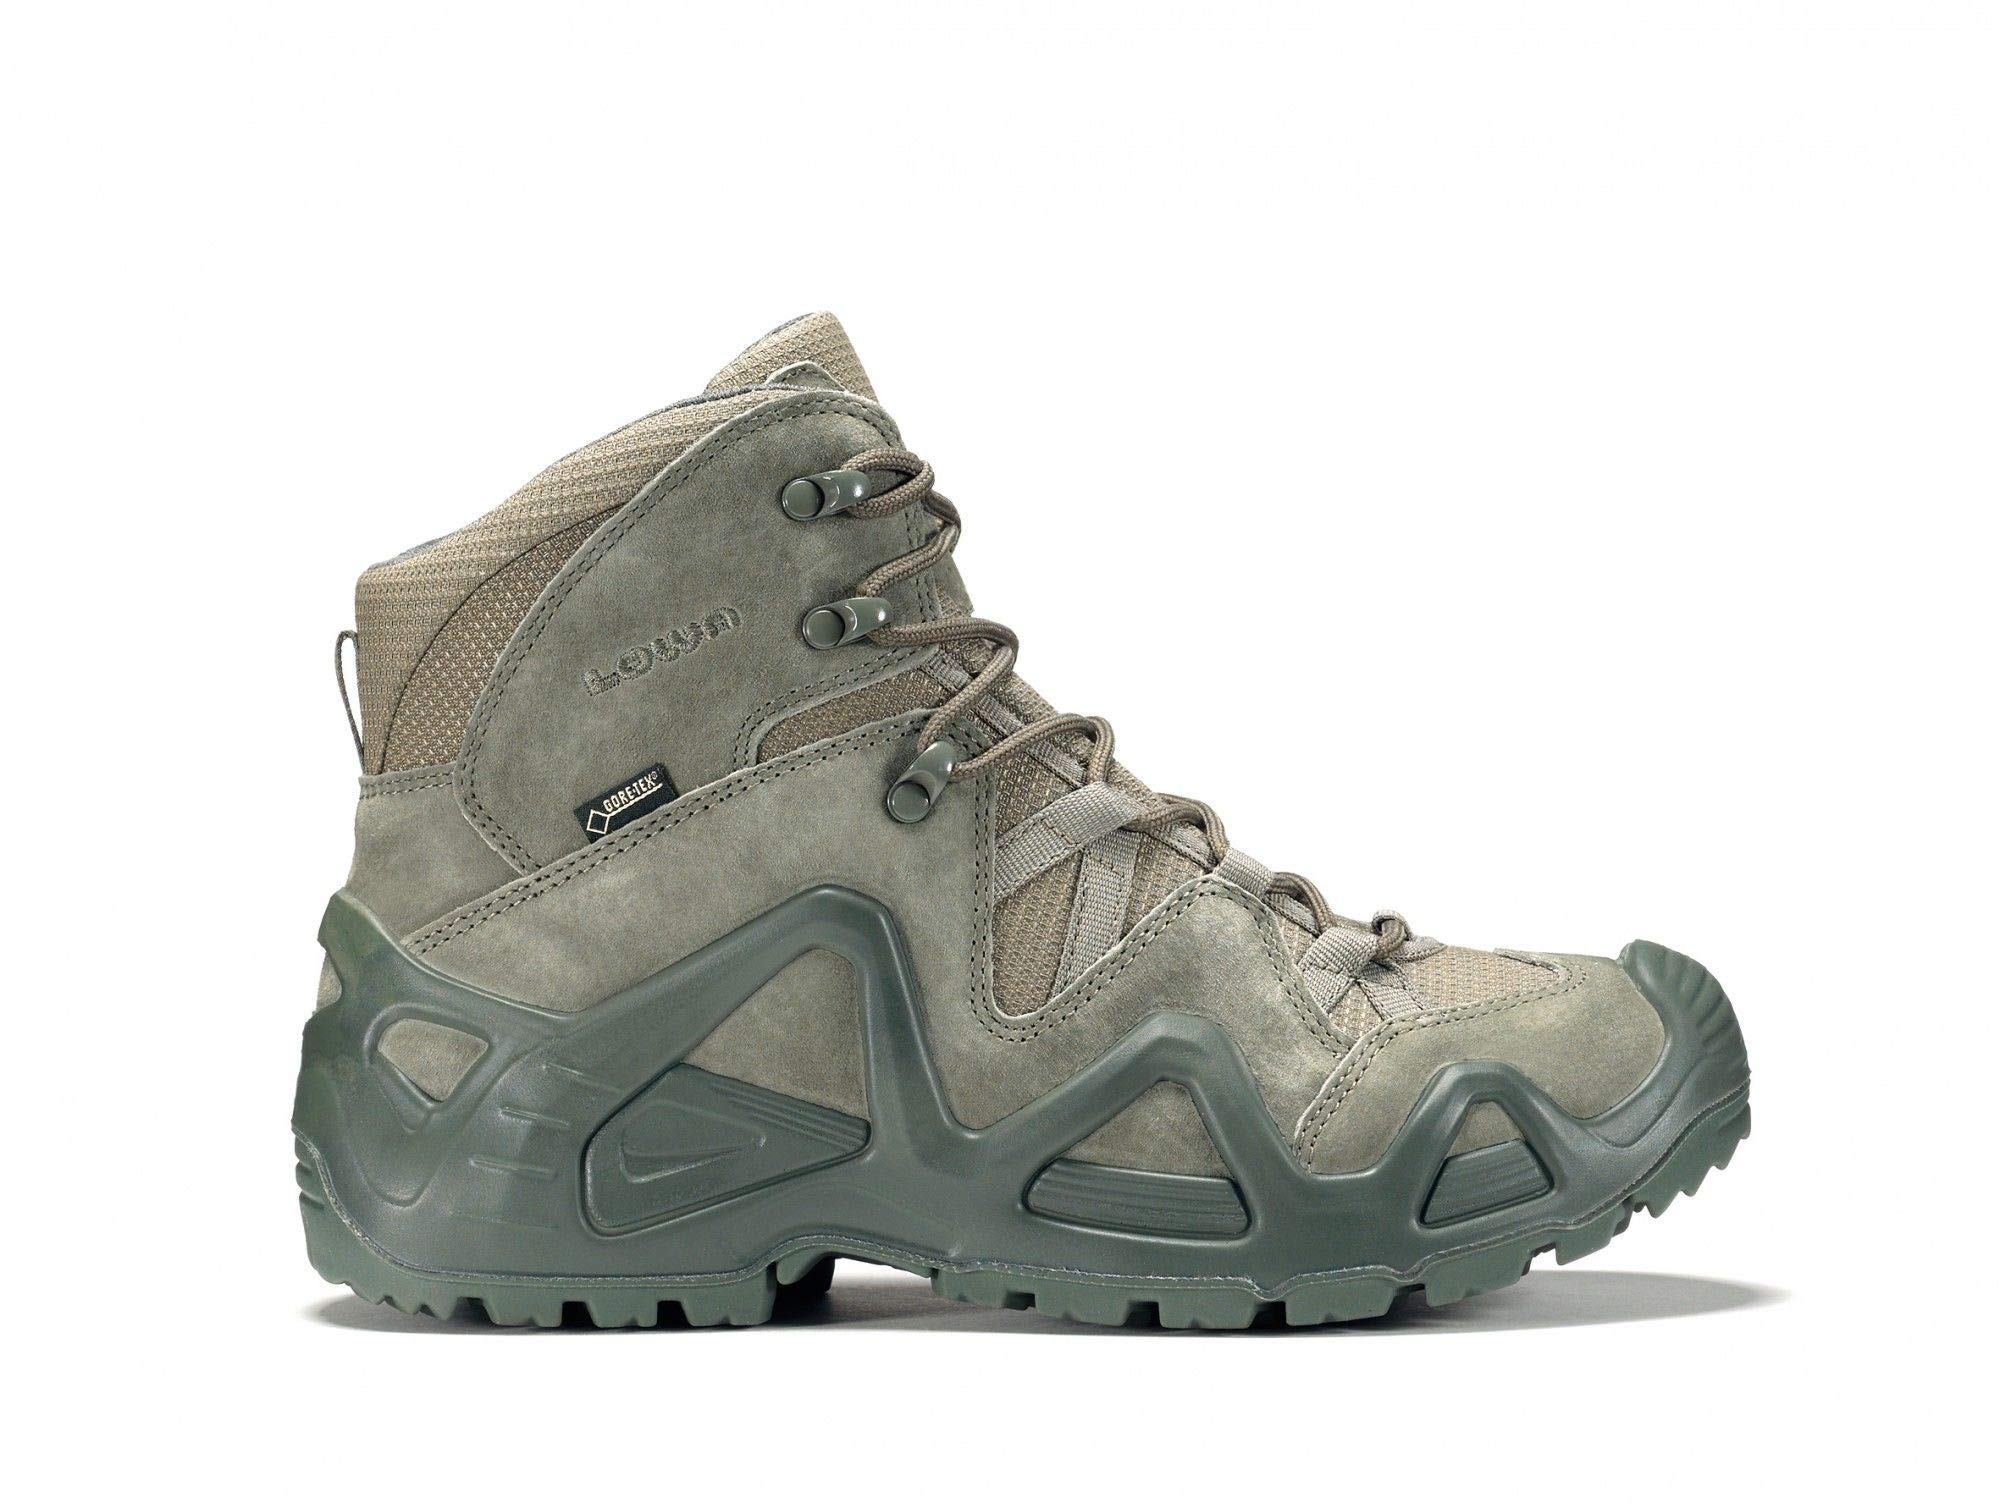 Zephyr GTX Mid Sage Military Tactical Boots